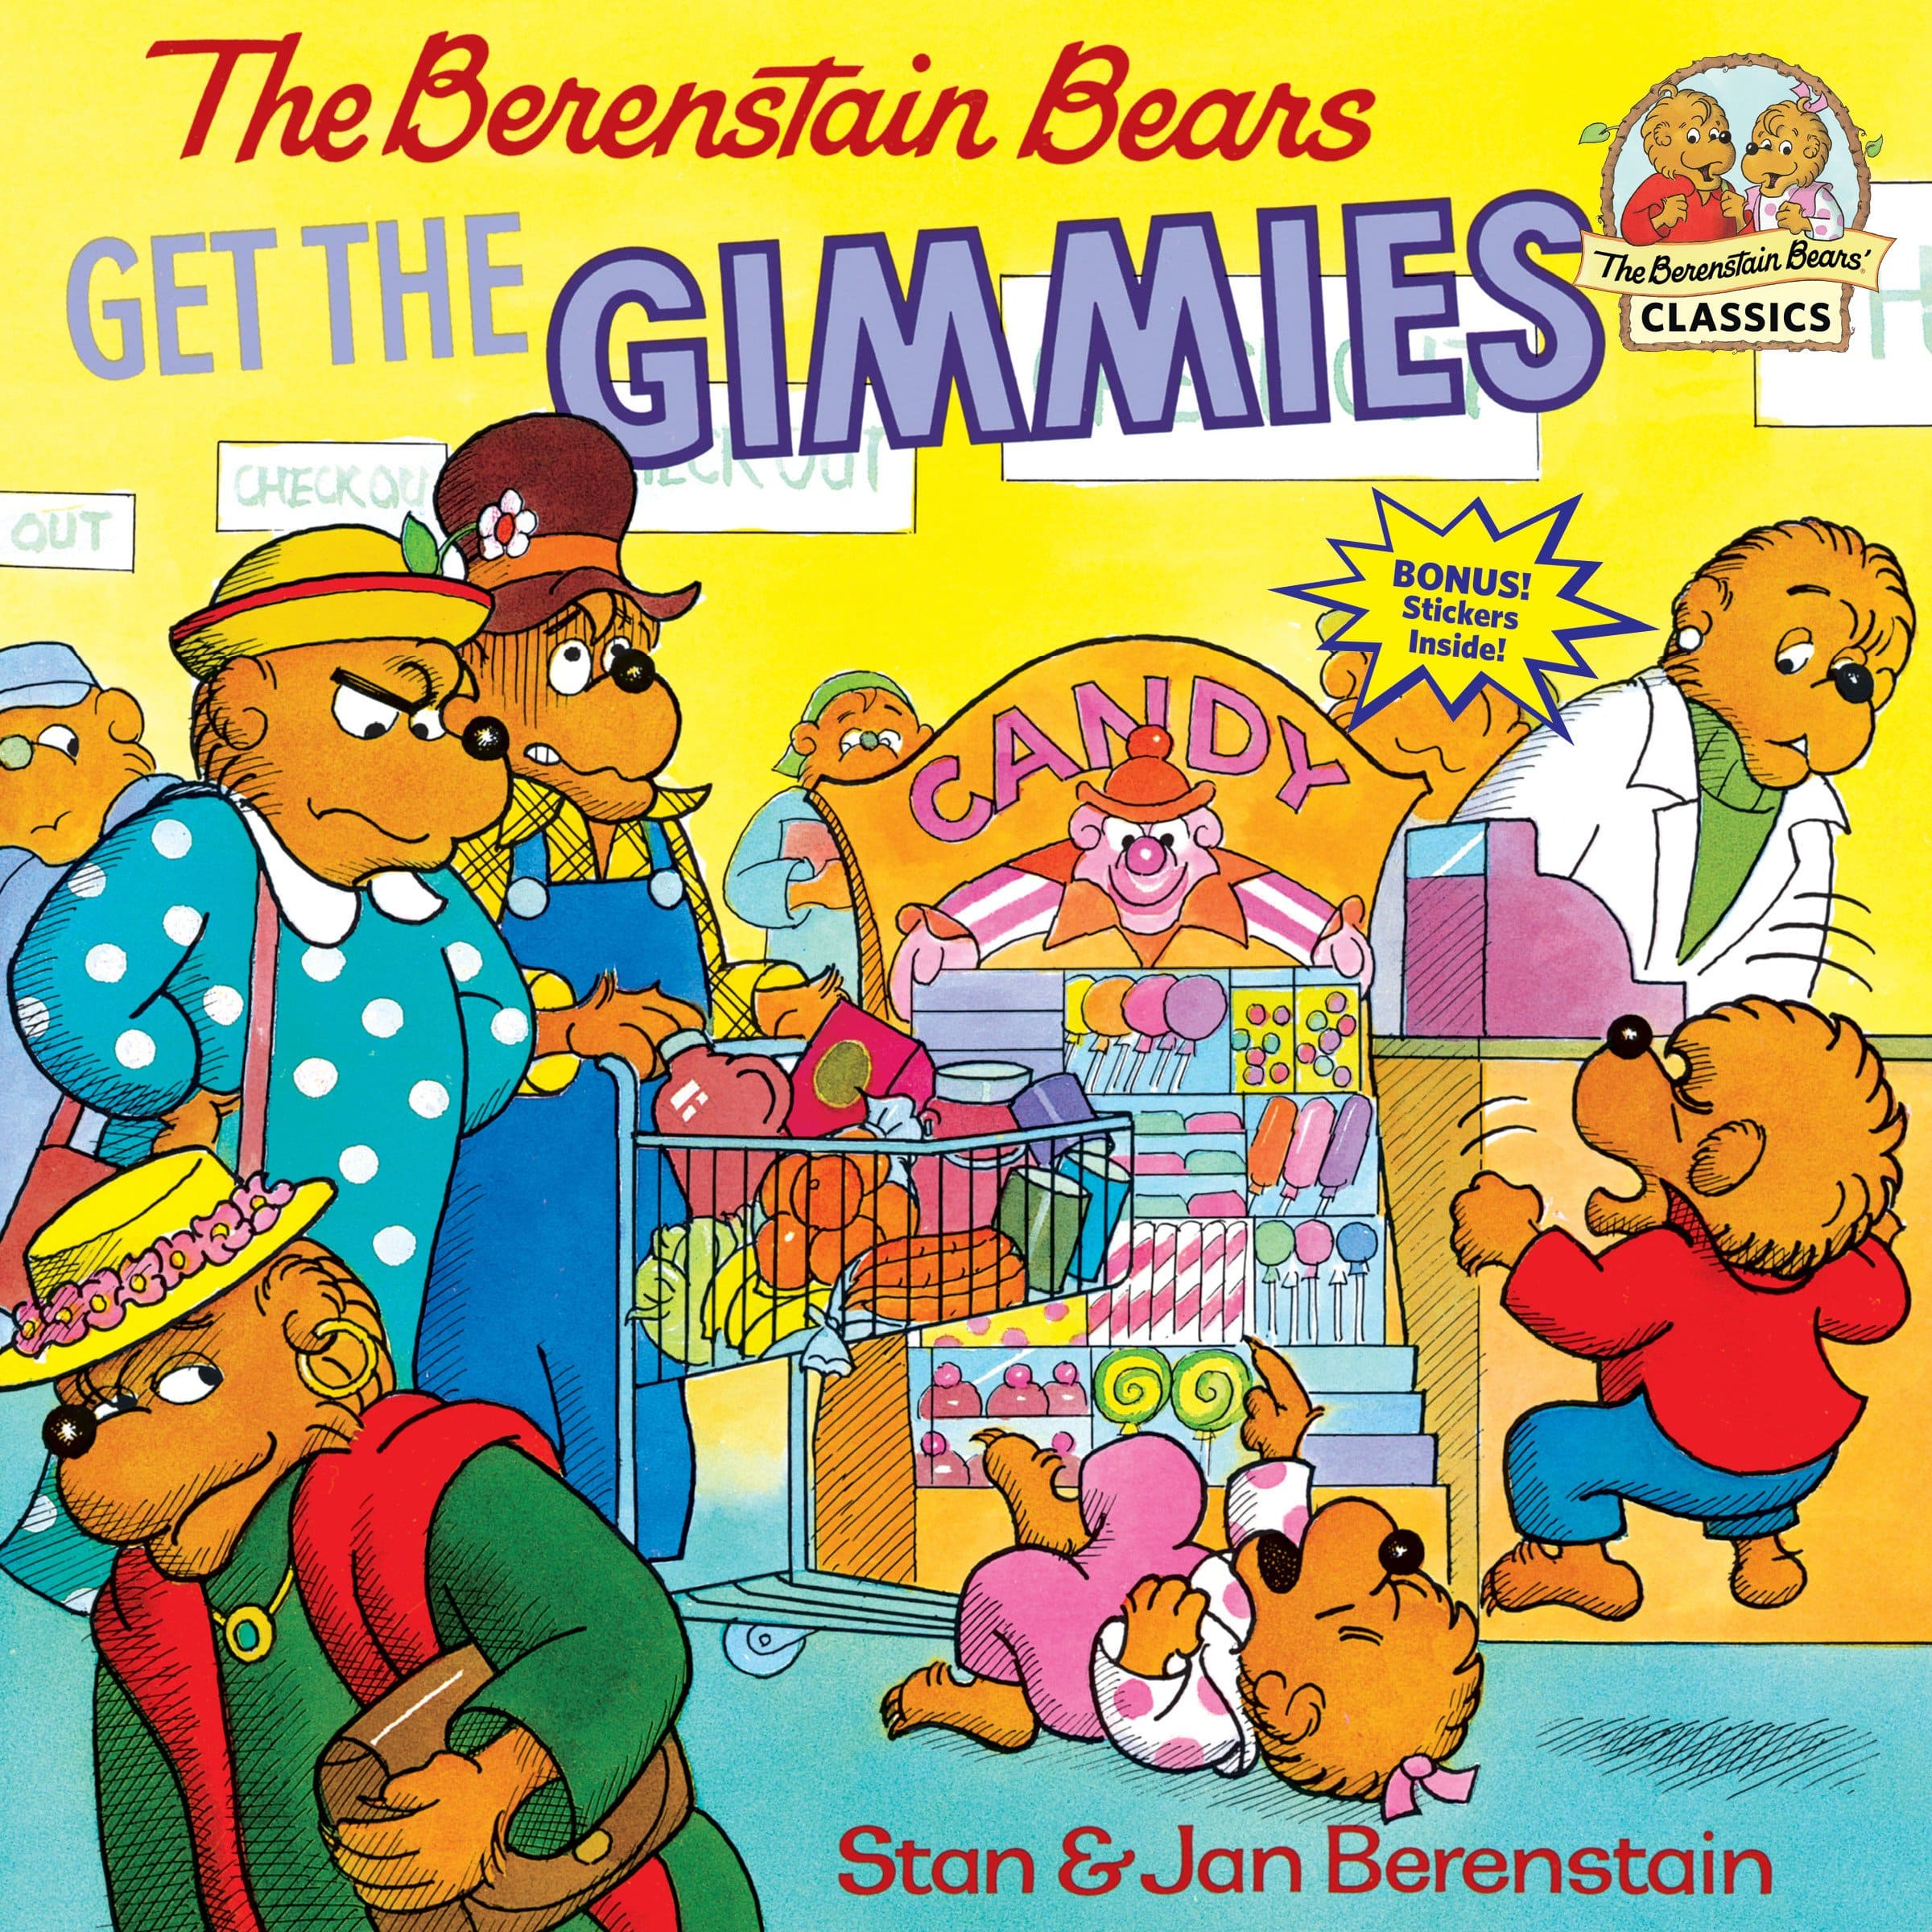 IMG : The Berenstain Bears Get the Gimmies